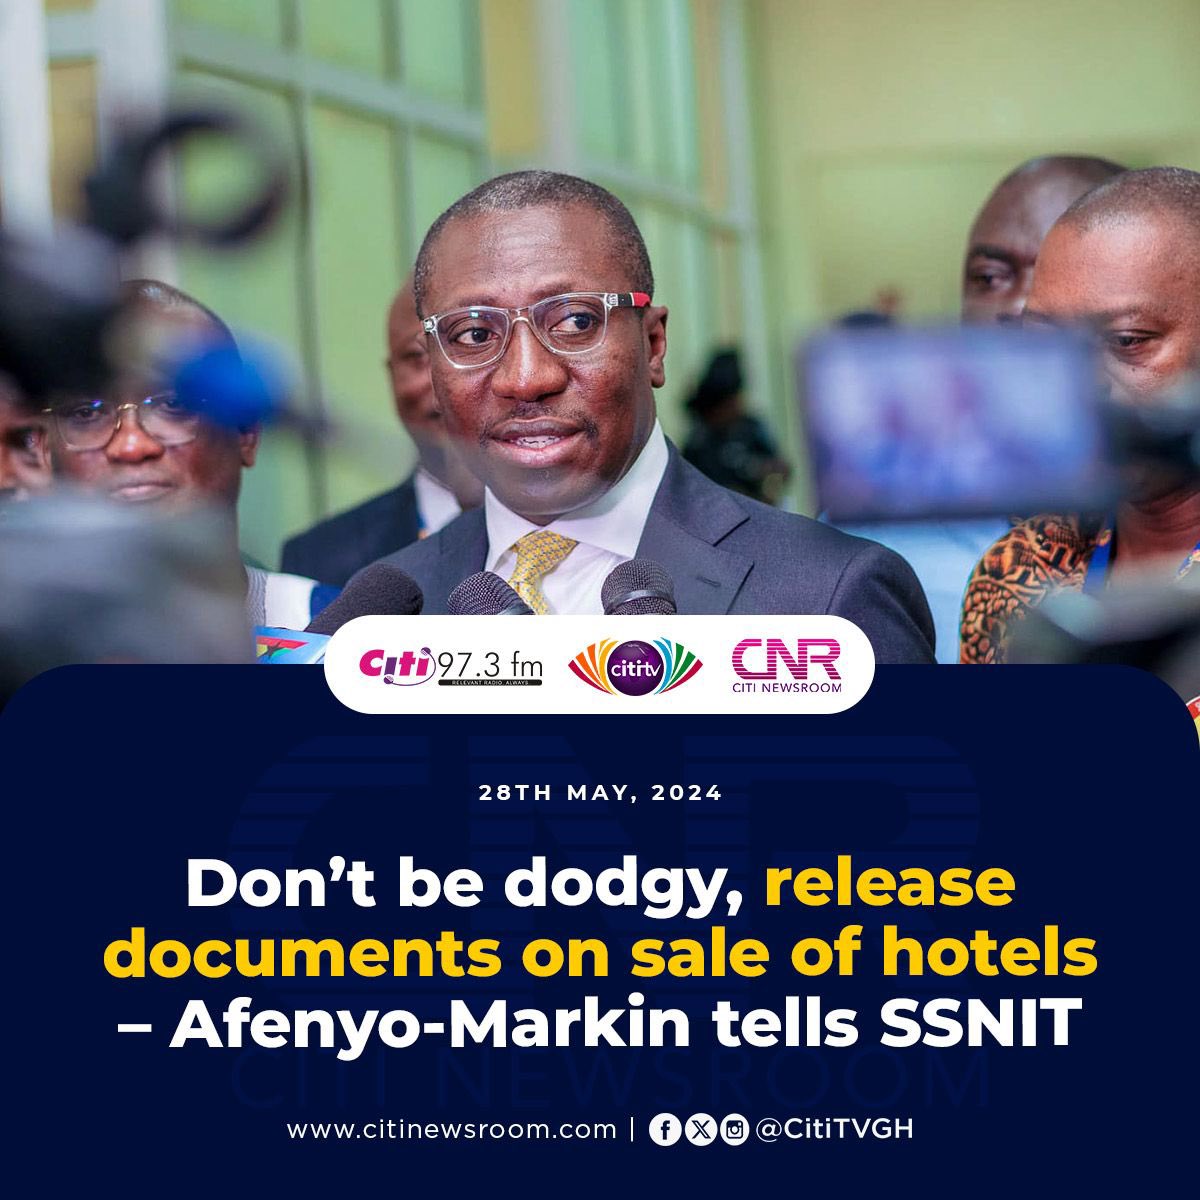 Don’t be dodgy, release documents on sale of hotels – Afenyo-Markin tells SSNIT 

| More here: tinyurl.com/mpdz6adp #CitiNewsroom